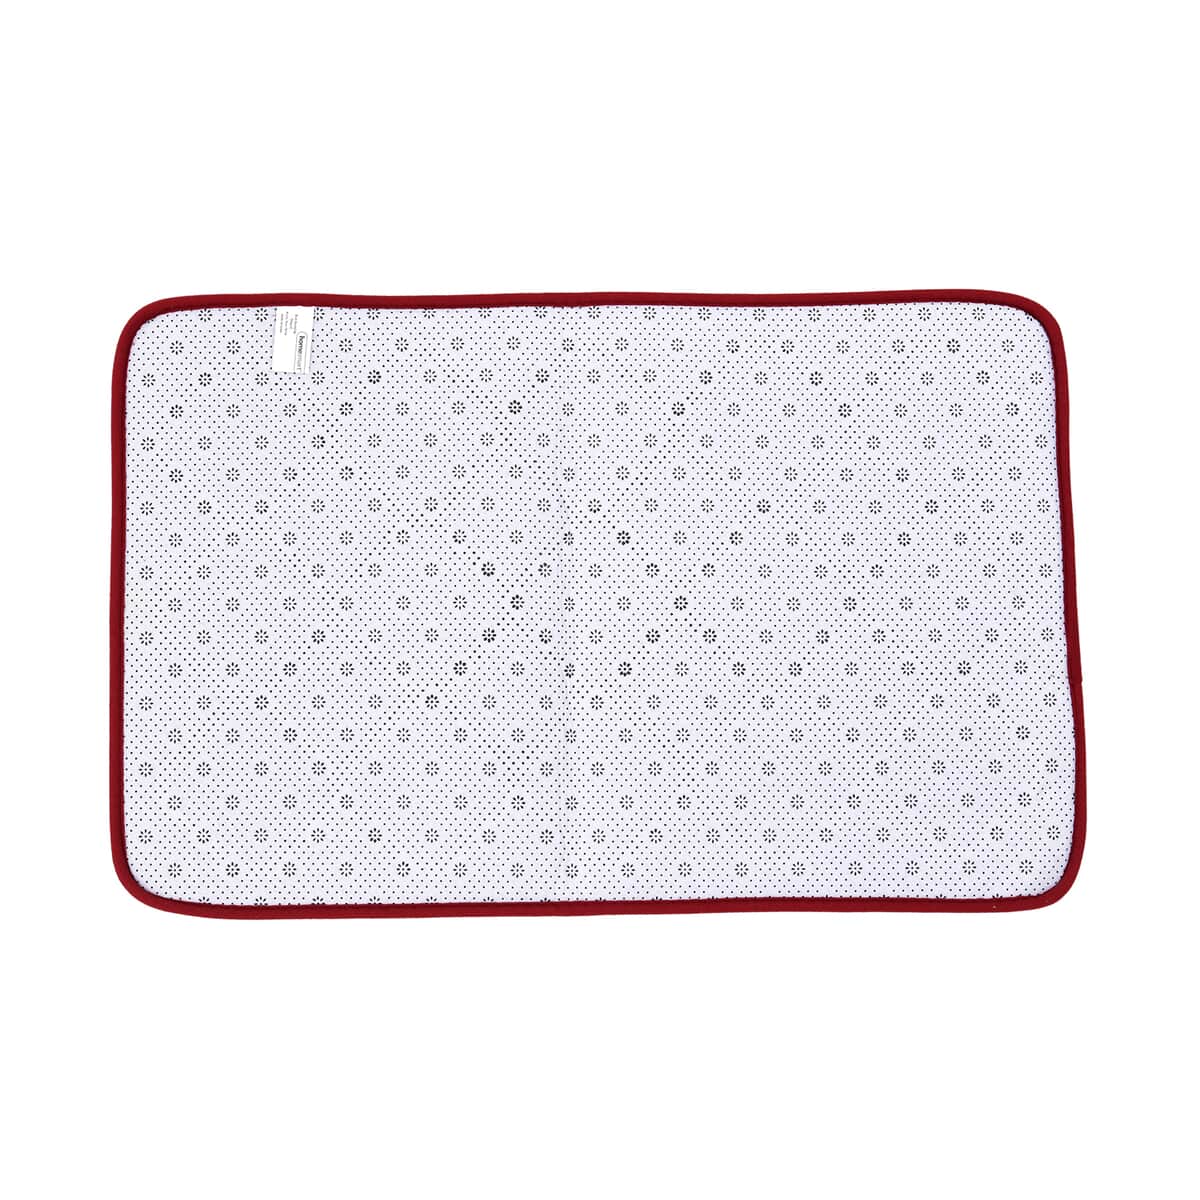 Red Embossed Flannel Rectangular Bathmat and Contour Toilet Mat image number 4